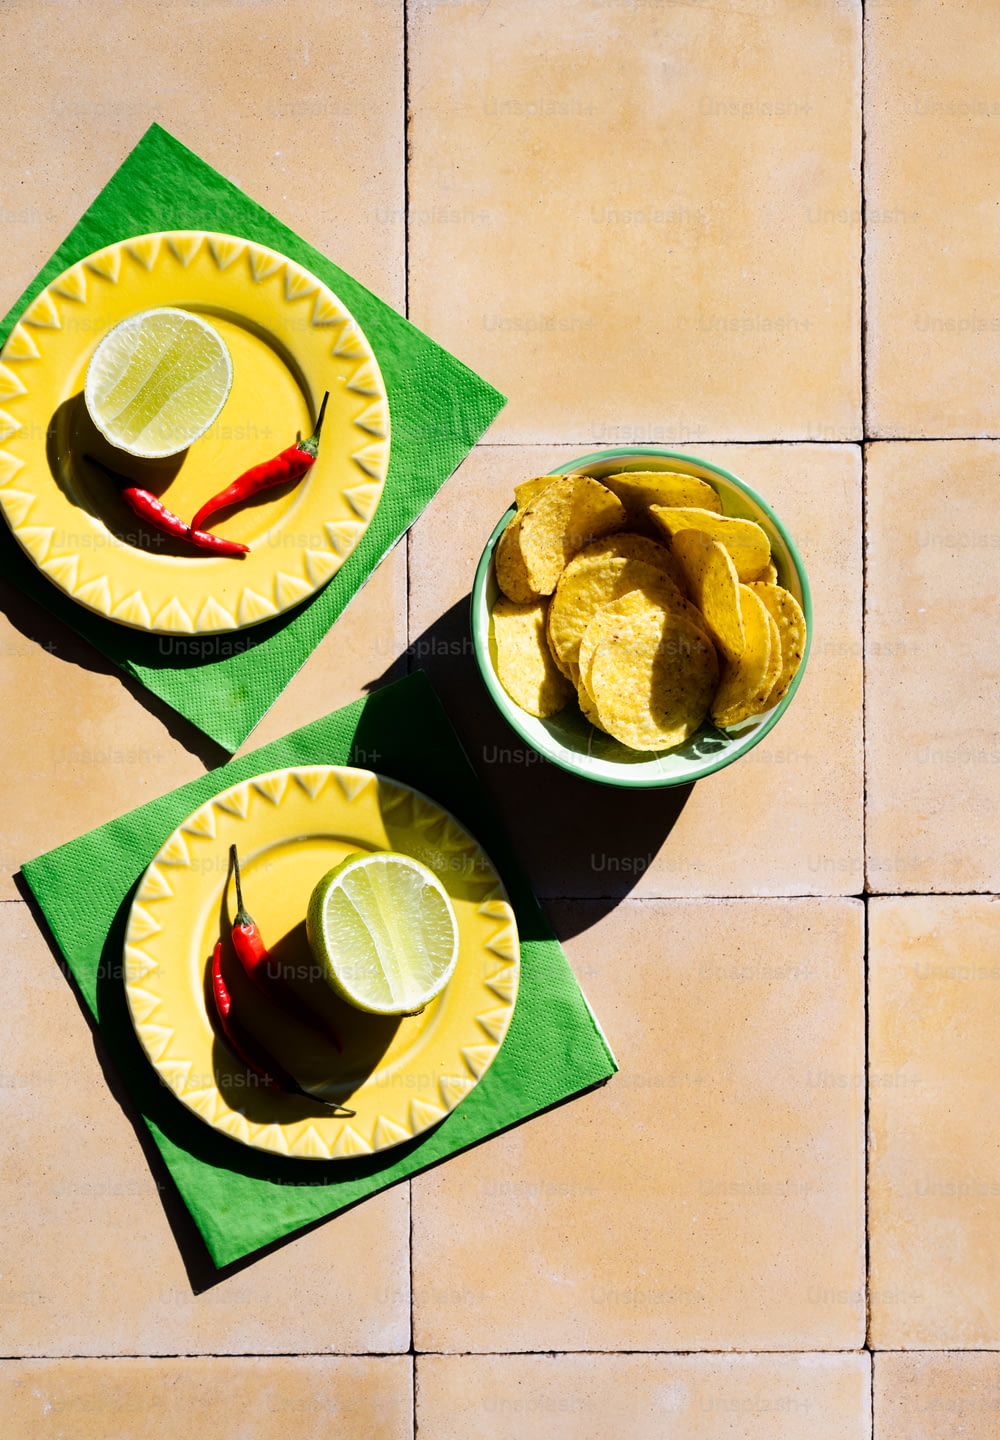 two bowls of chips and limes on a table